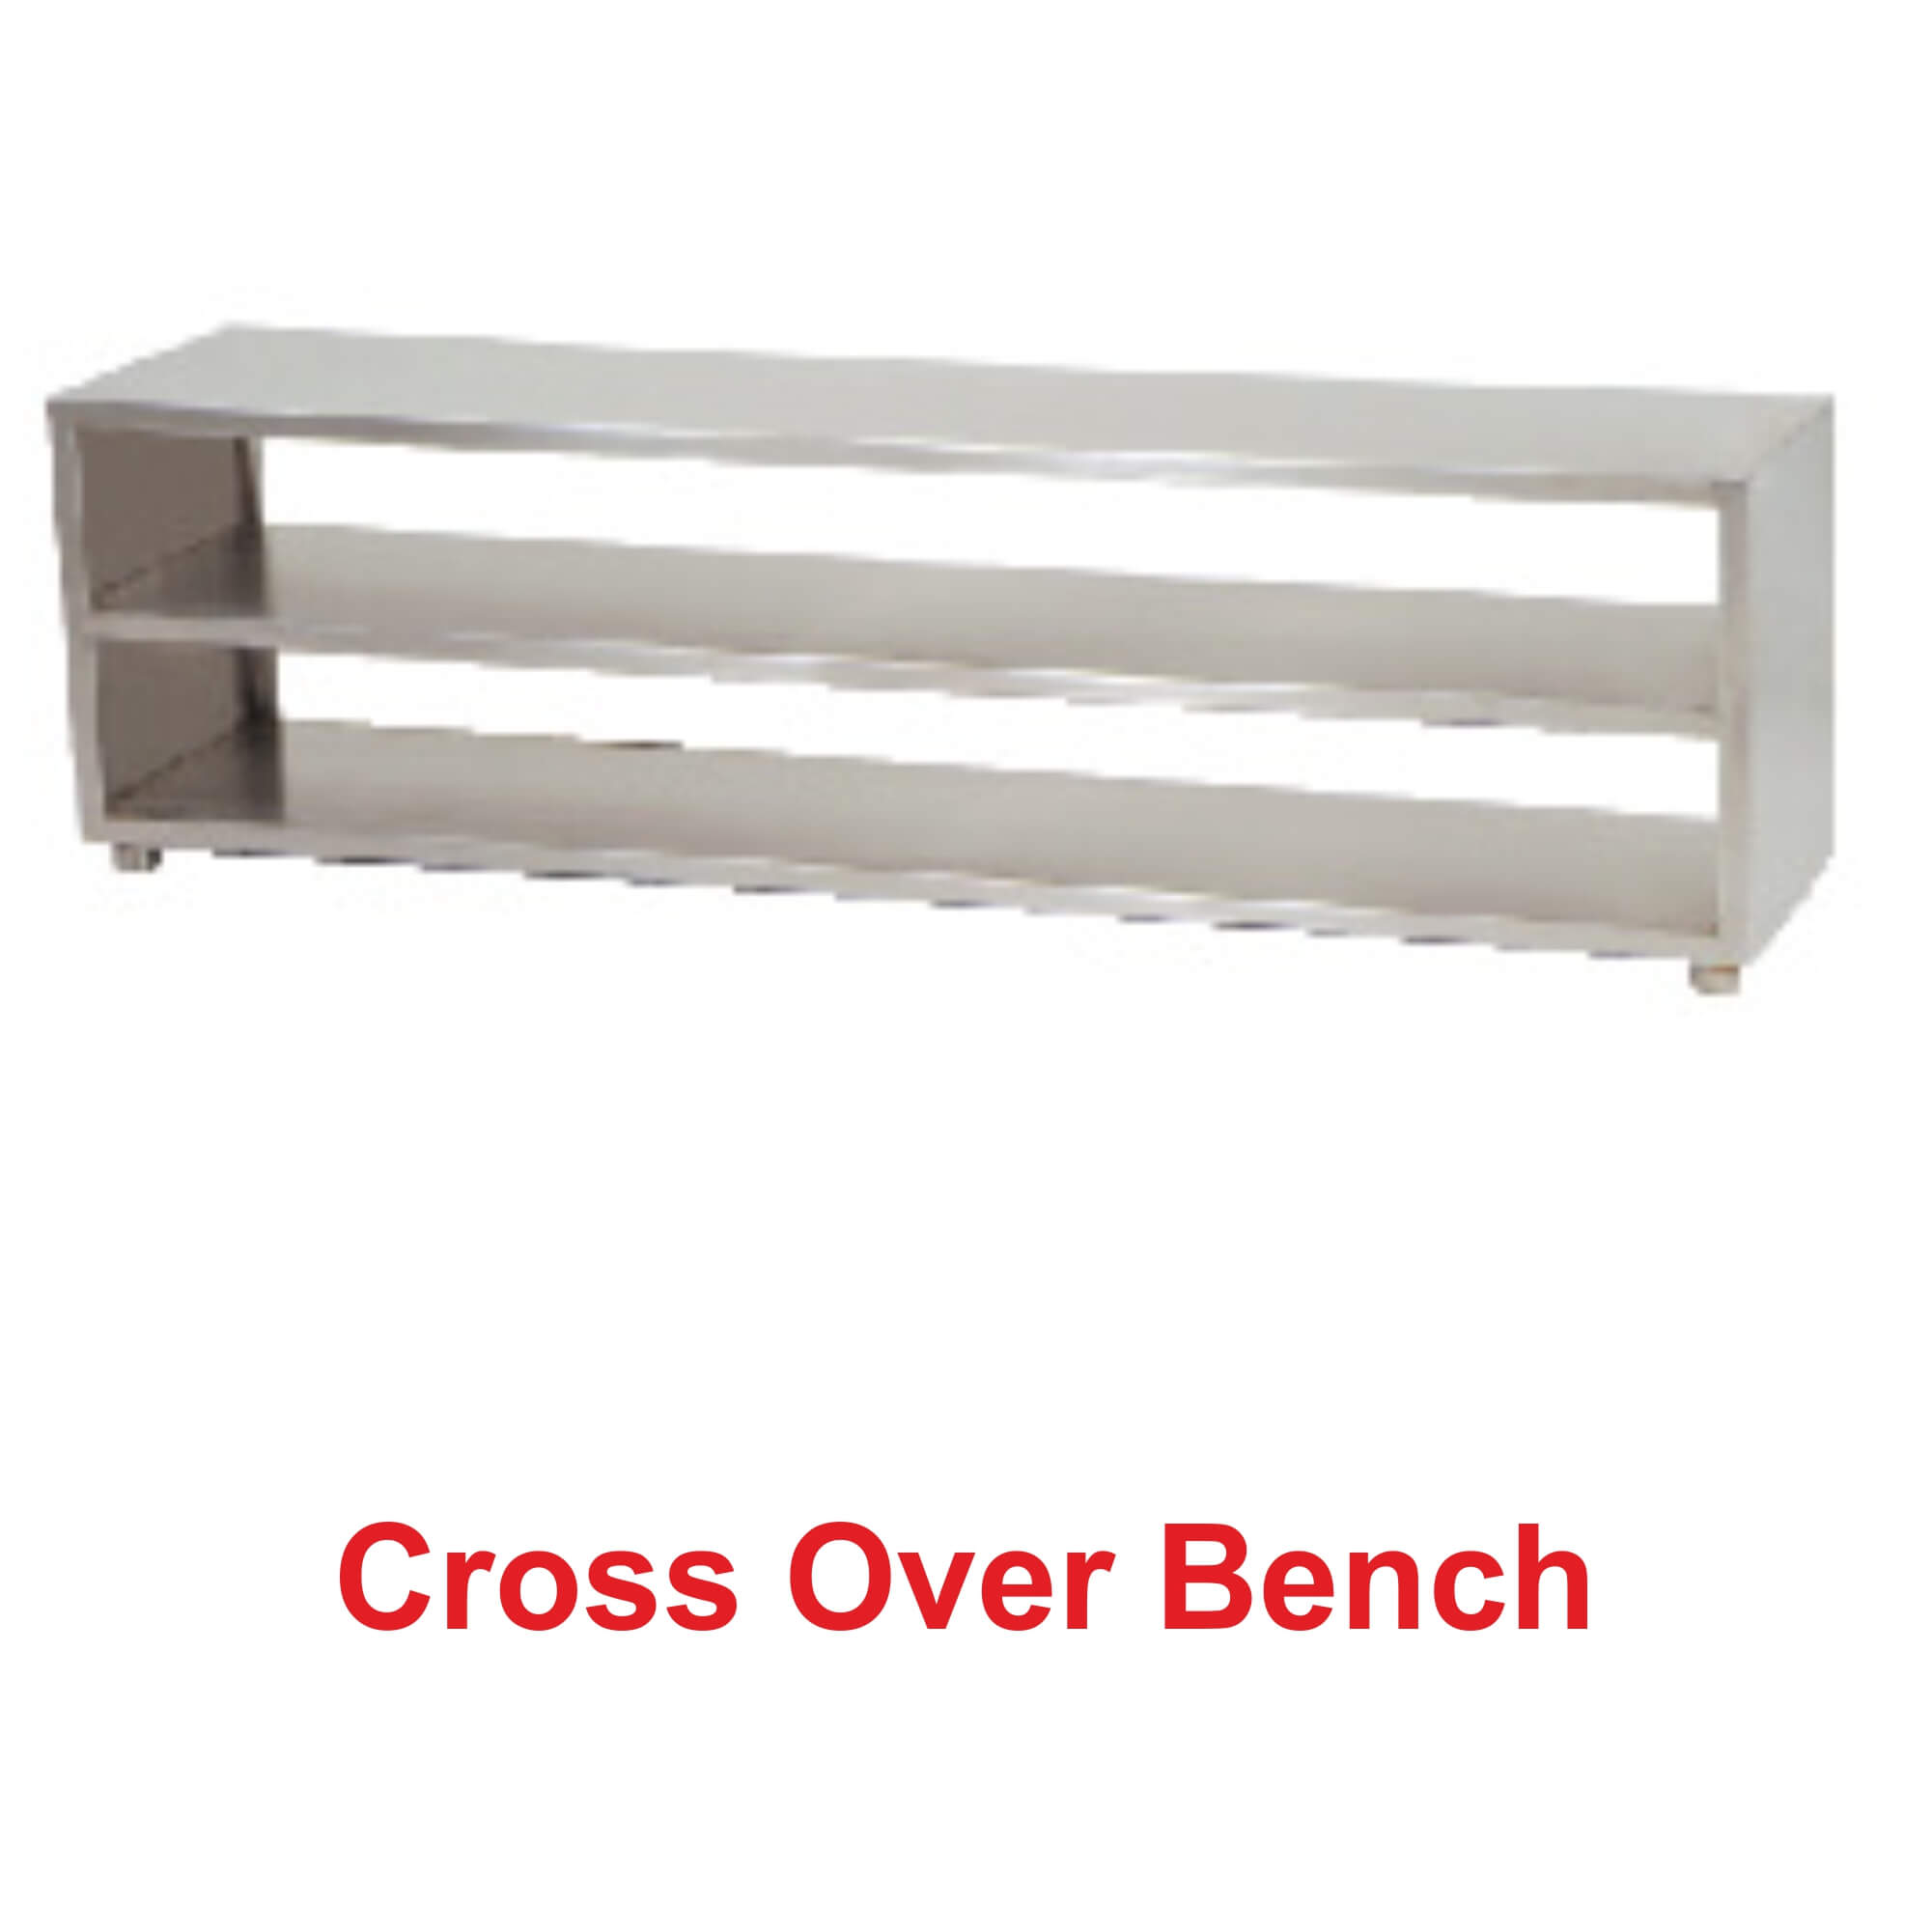 Cross Over Bench Manufacturer in India